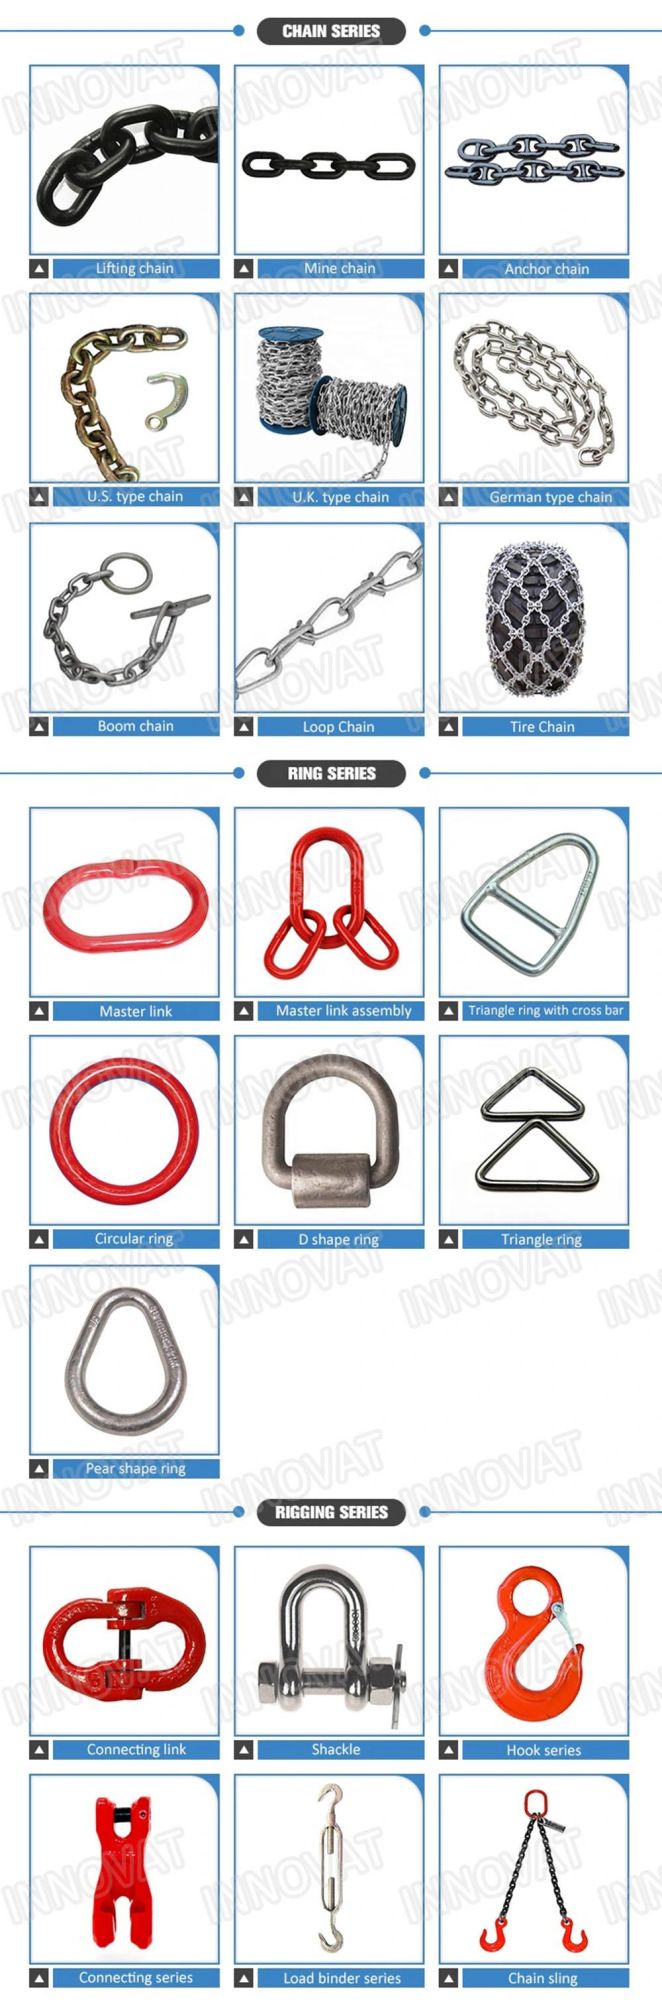 Big Round Stainless Steel Link Chain